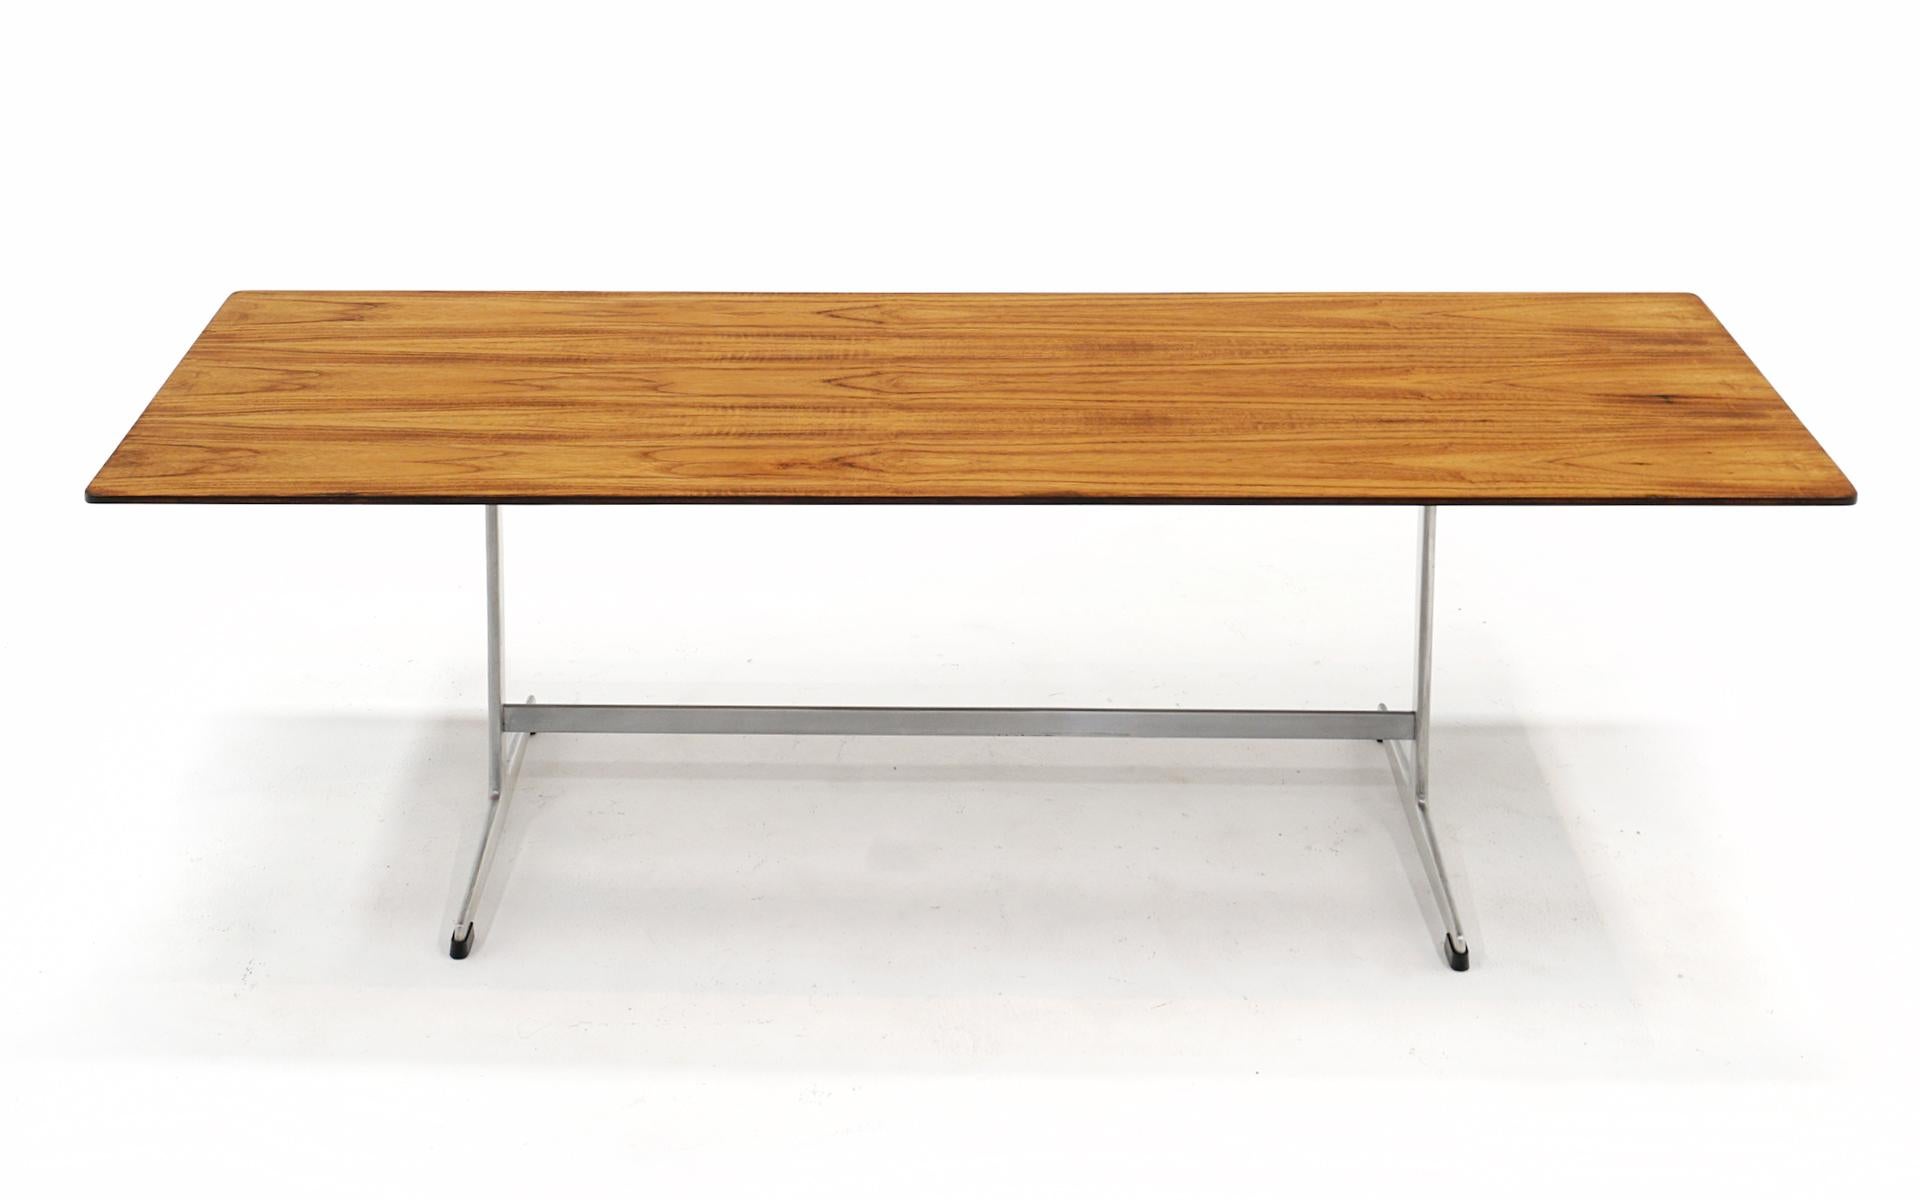 Arne Jacobsen coffee table with Brazilian rosewood top and aluminum base. Beautiful figuring in the rosewood. Very good condition with very few signs of use.